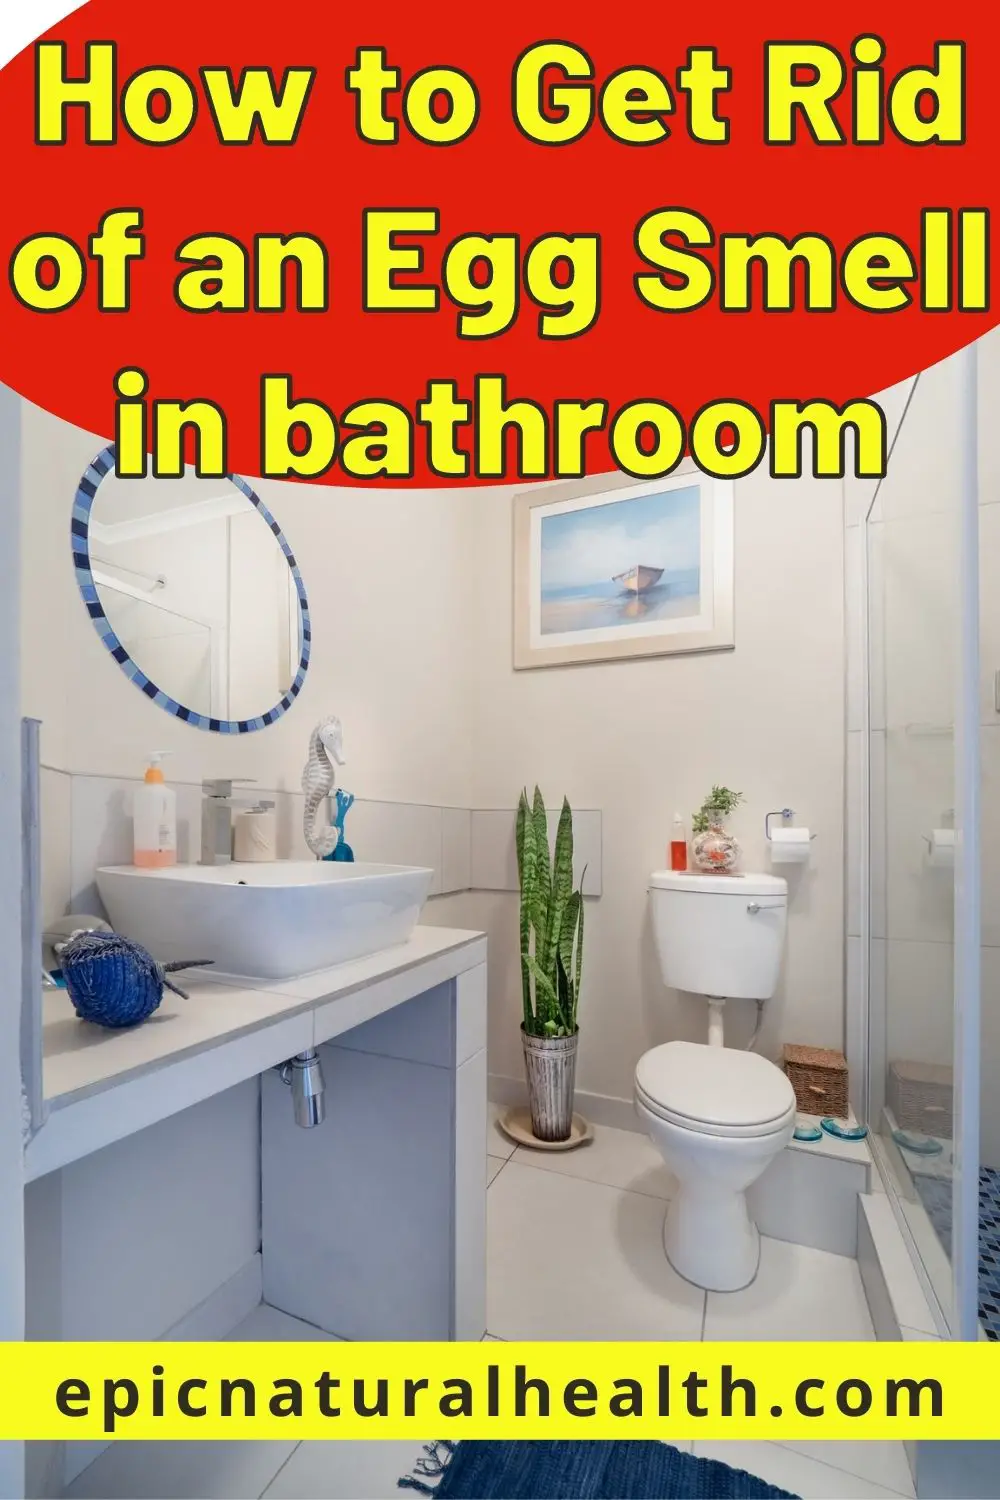 How to Get Rid of an Egg Smell in bathroom PIN